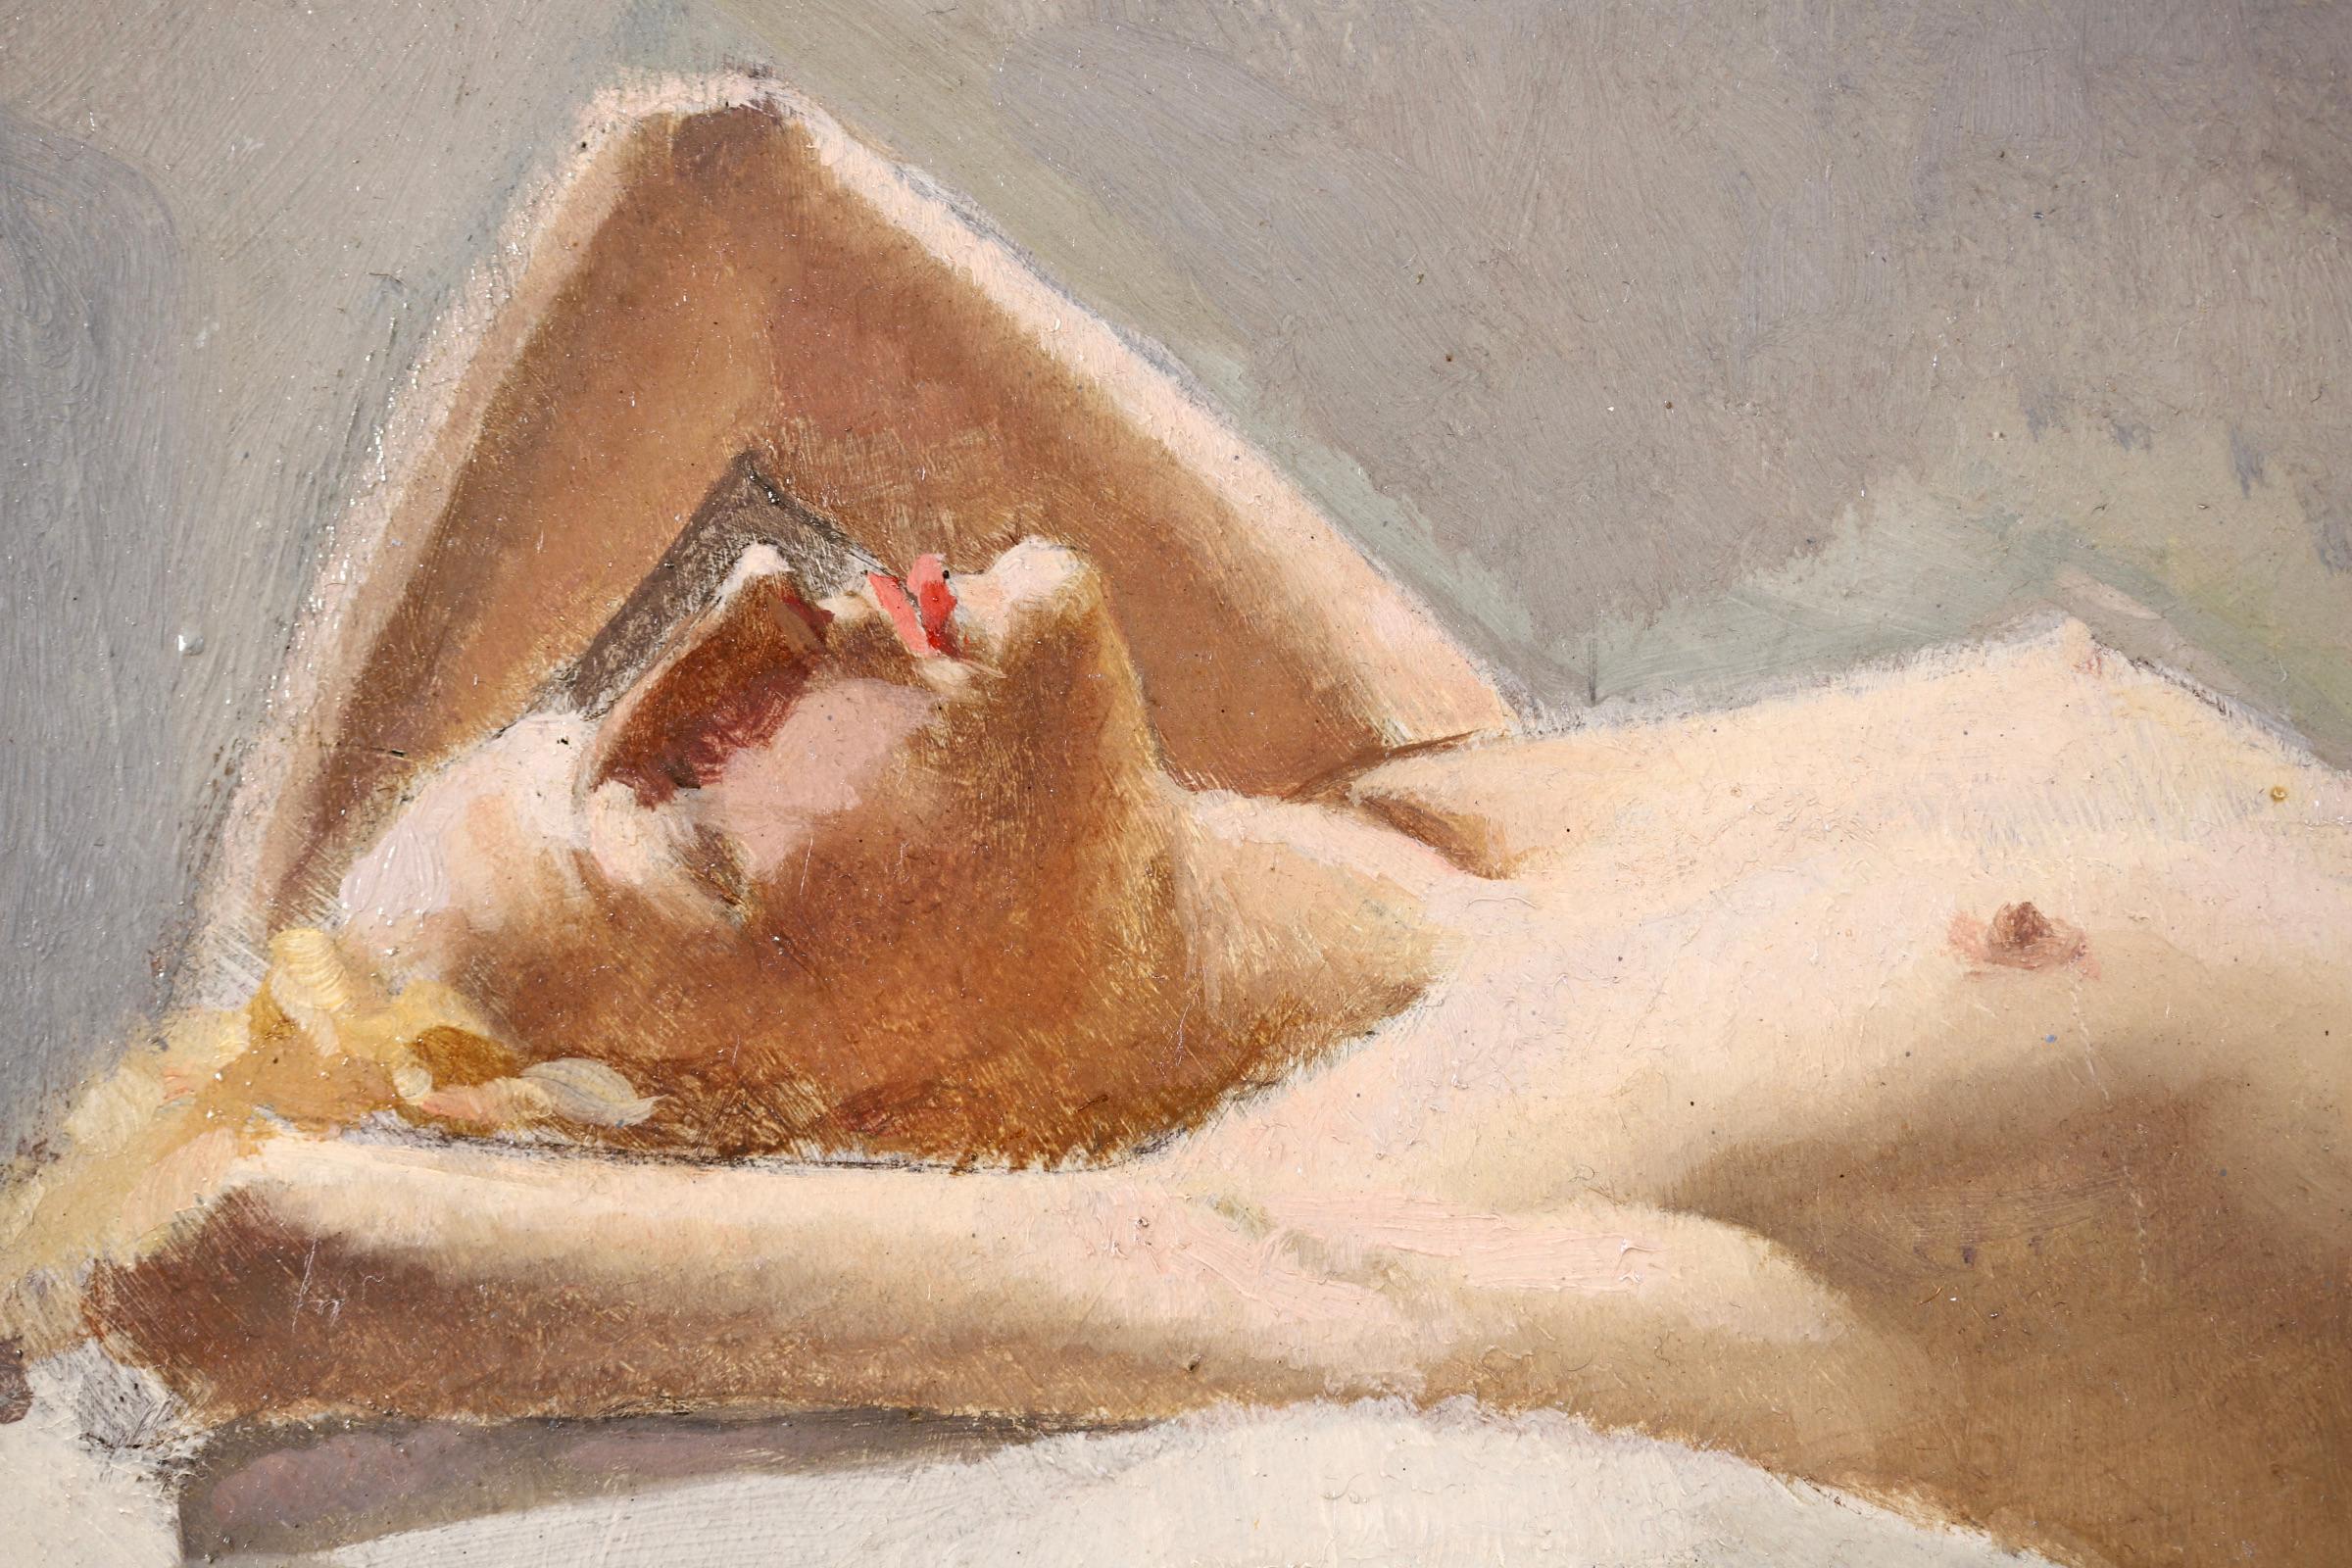 A wonderful oil on canvas circa 1930 by Tunisian post impressionist painter Albert Braitou-Sala. The work depicts a beautiful, blonde nude laid back on a white sheet surrounded by clouds in a blue-grey sky. A stunning piece.

Signature:
Signed lower